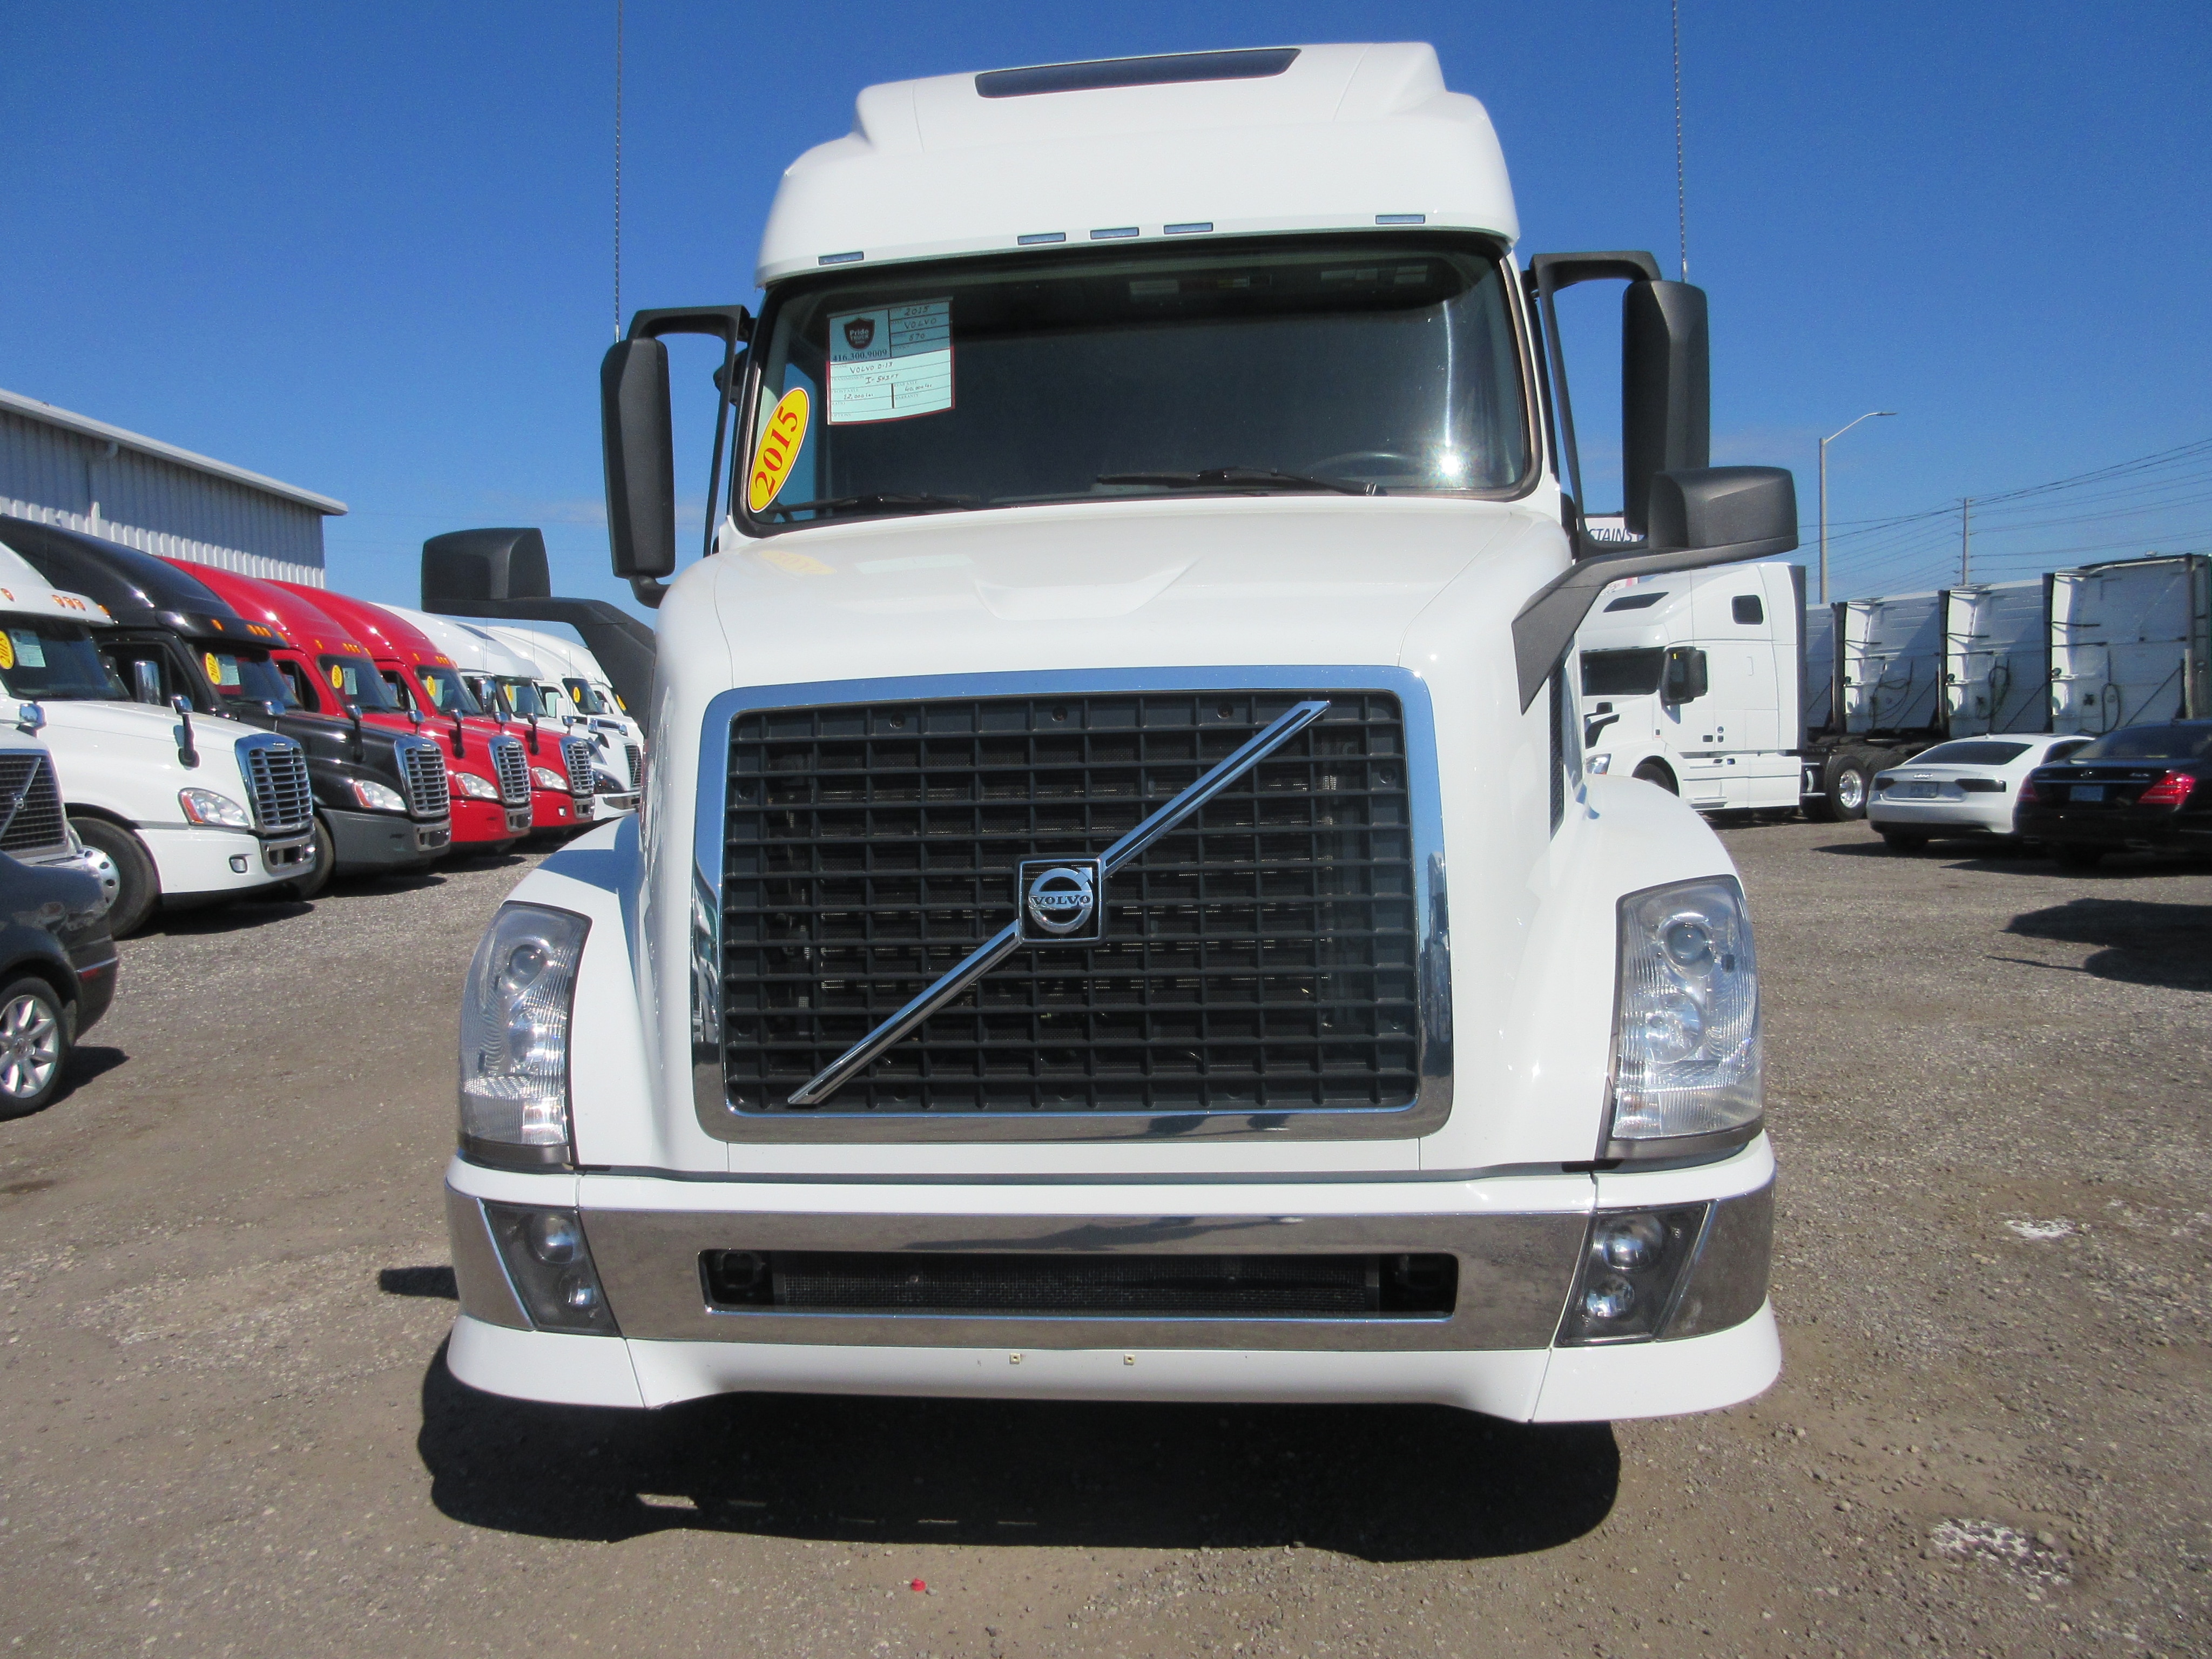 Where can you find the value of a Freightliner truck?